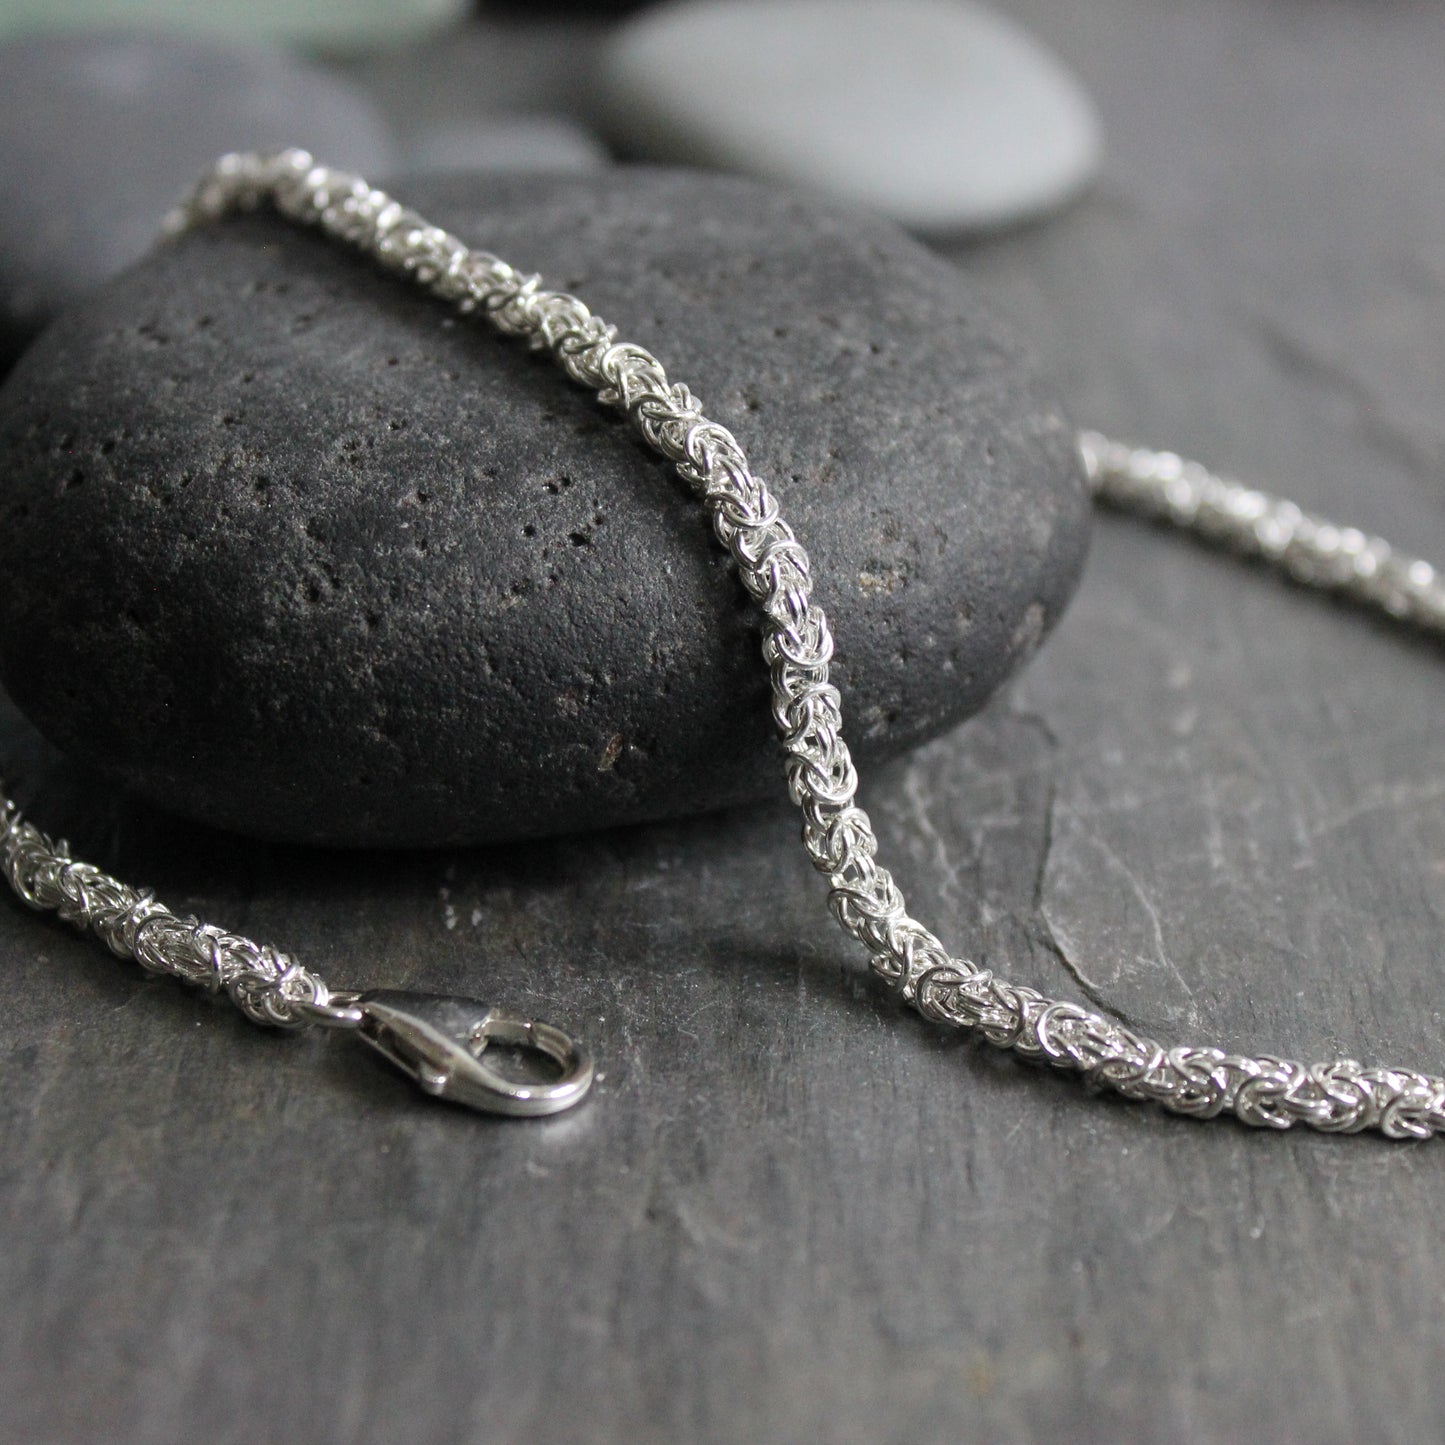 Handmade sterling silver byzantine chain handmade by Will Macy in Corvallis, OR. 